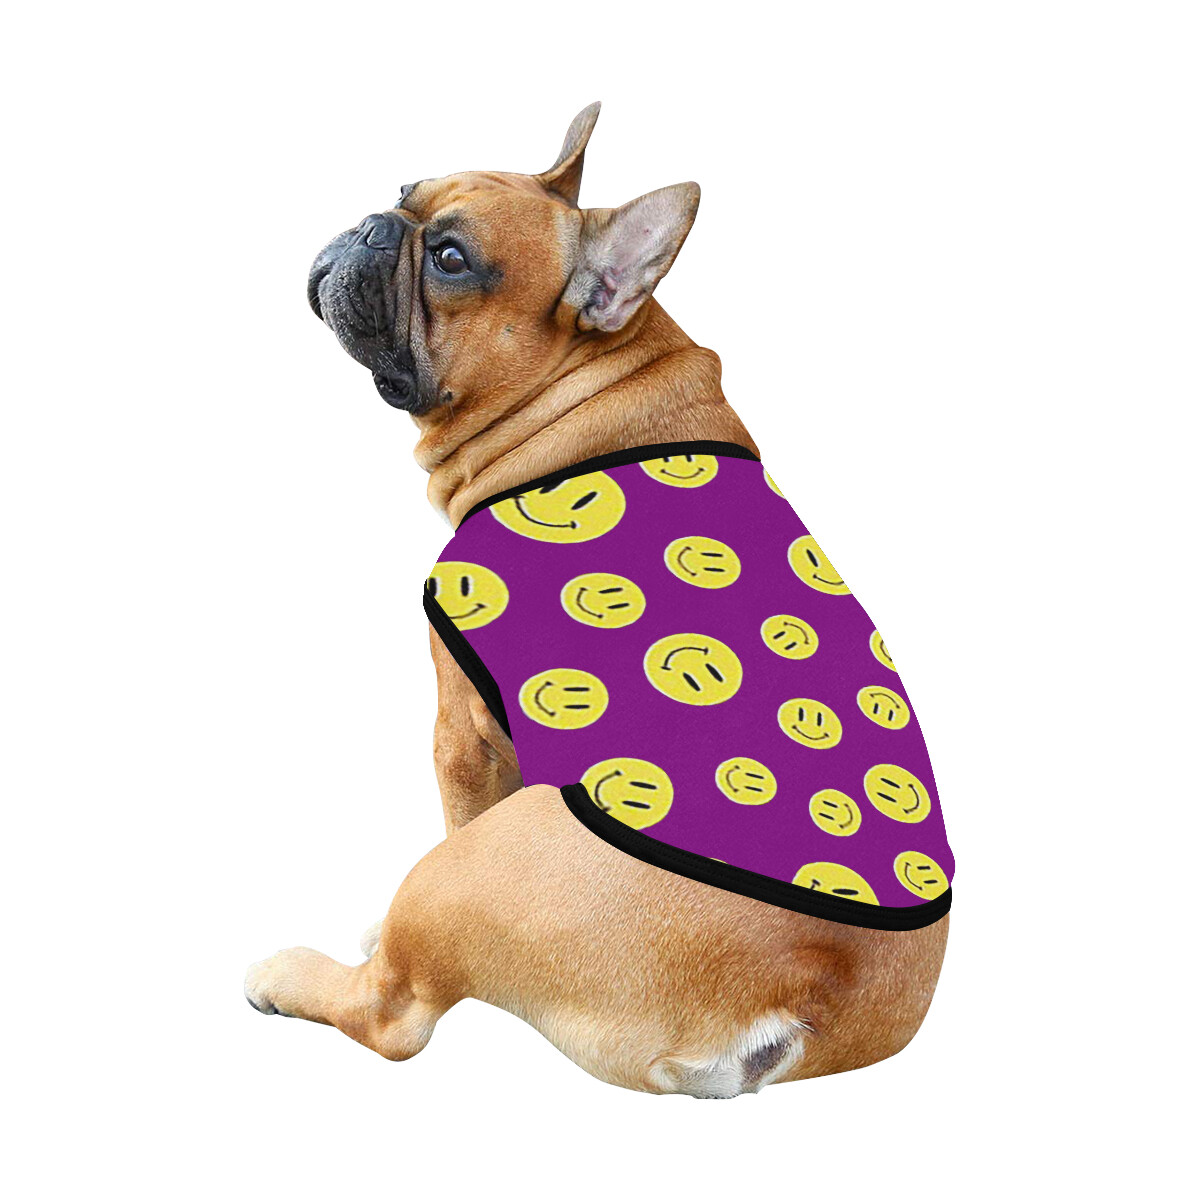 🐕 Happy faces Dog Tank Top, Dog shirt, Dog clothes, Gifts, front back print, 7 sizes XS to 3XL, dog t-shirt, dog t-shirt, dog gift, purple